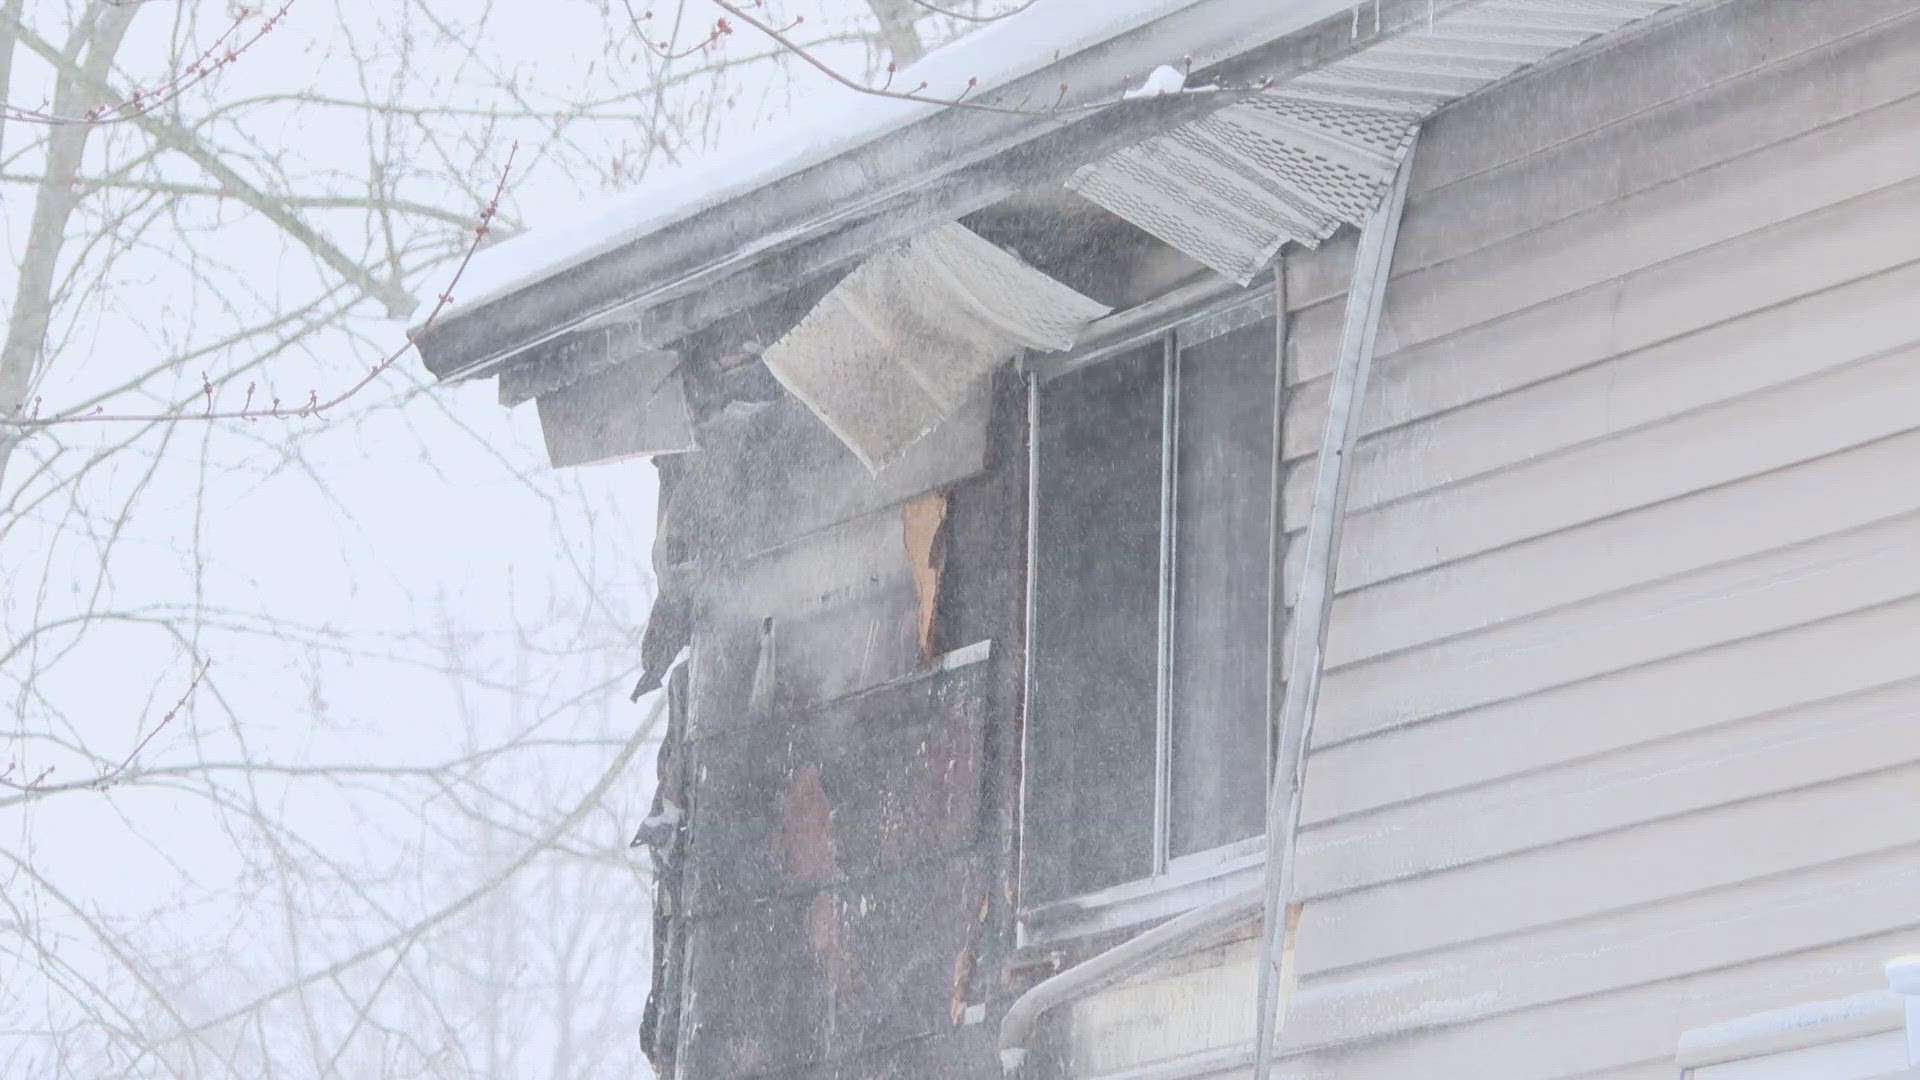 No one was injured and damage is estimated at $3,000. Elyria police raided the house earlier this month, but the family says officers went to the wrong home.